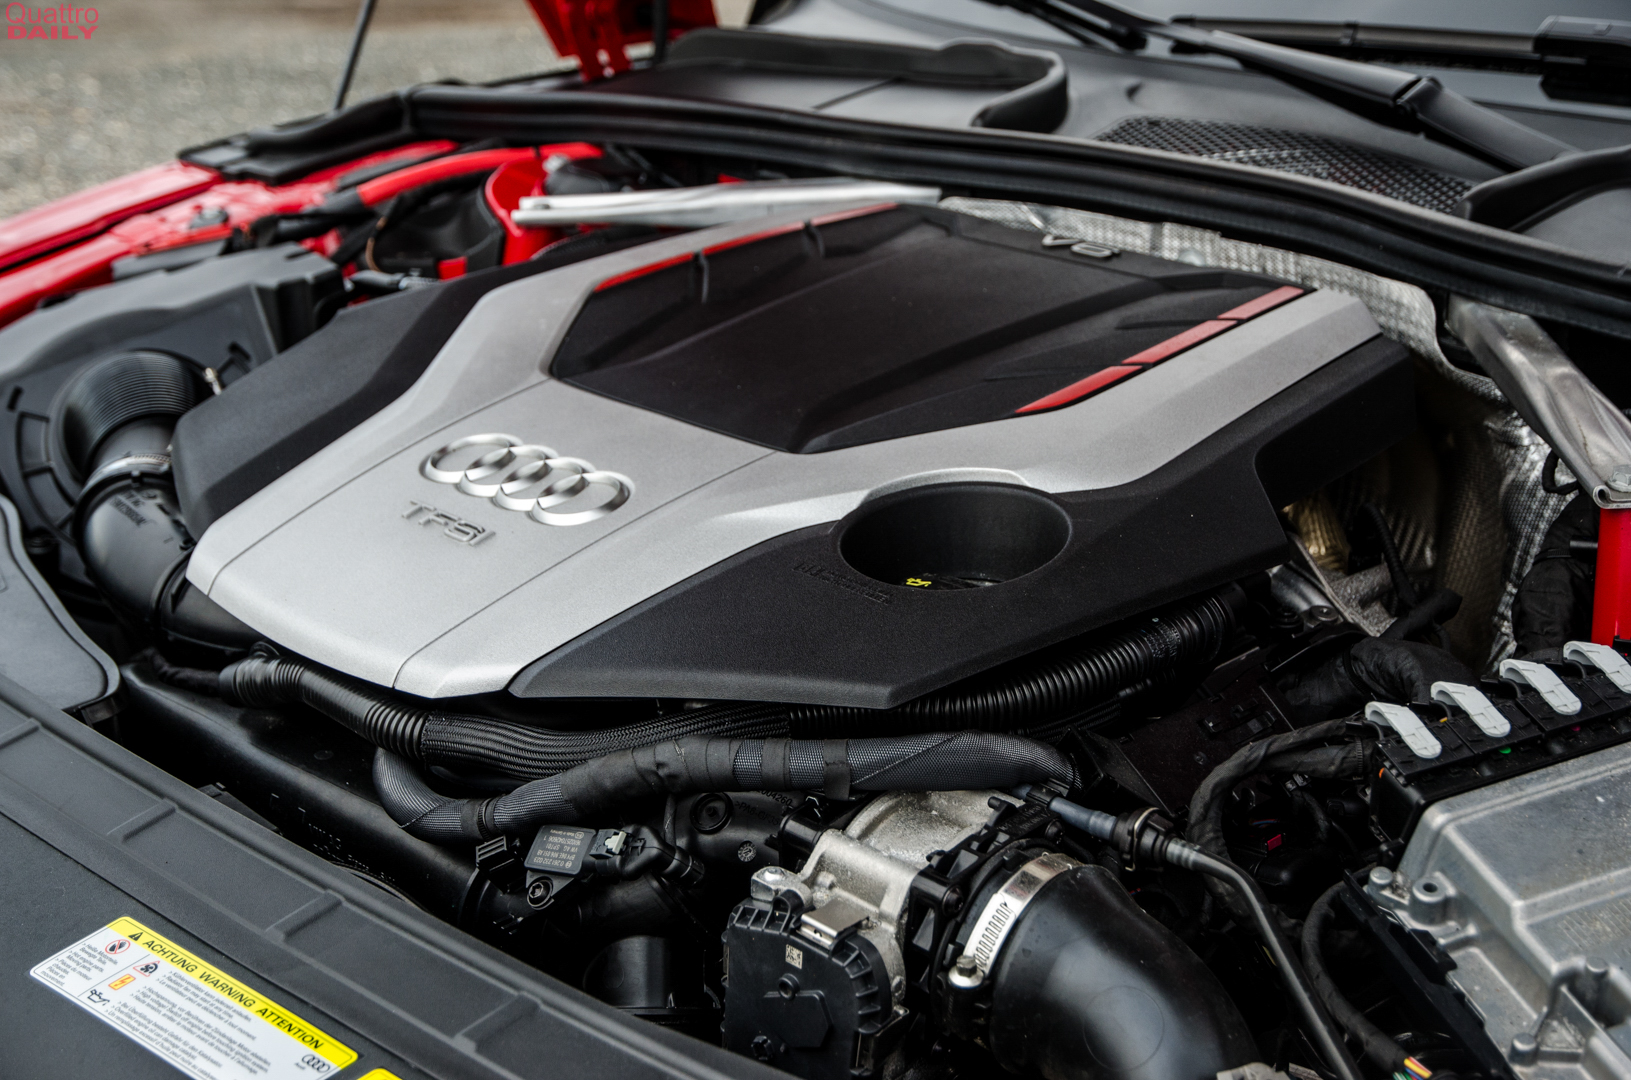 The new Audi S5 Coupe turns to turbo power with 3.0 litre V6 engine